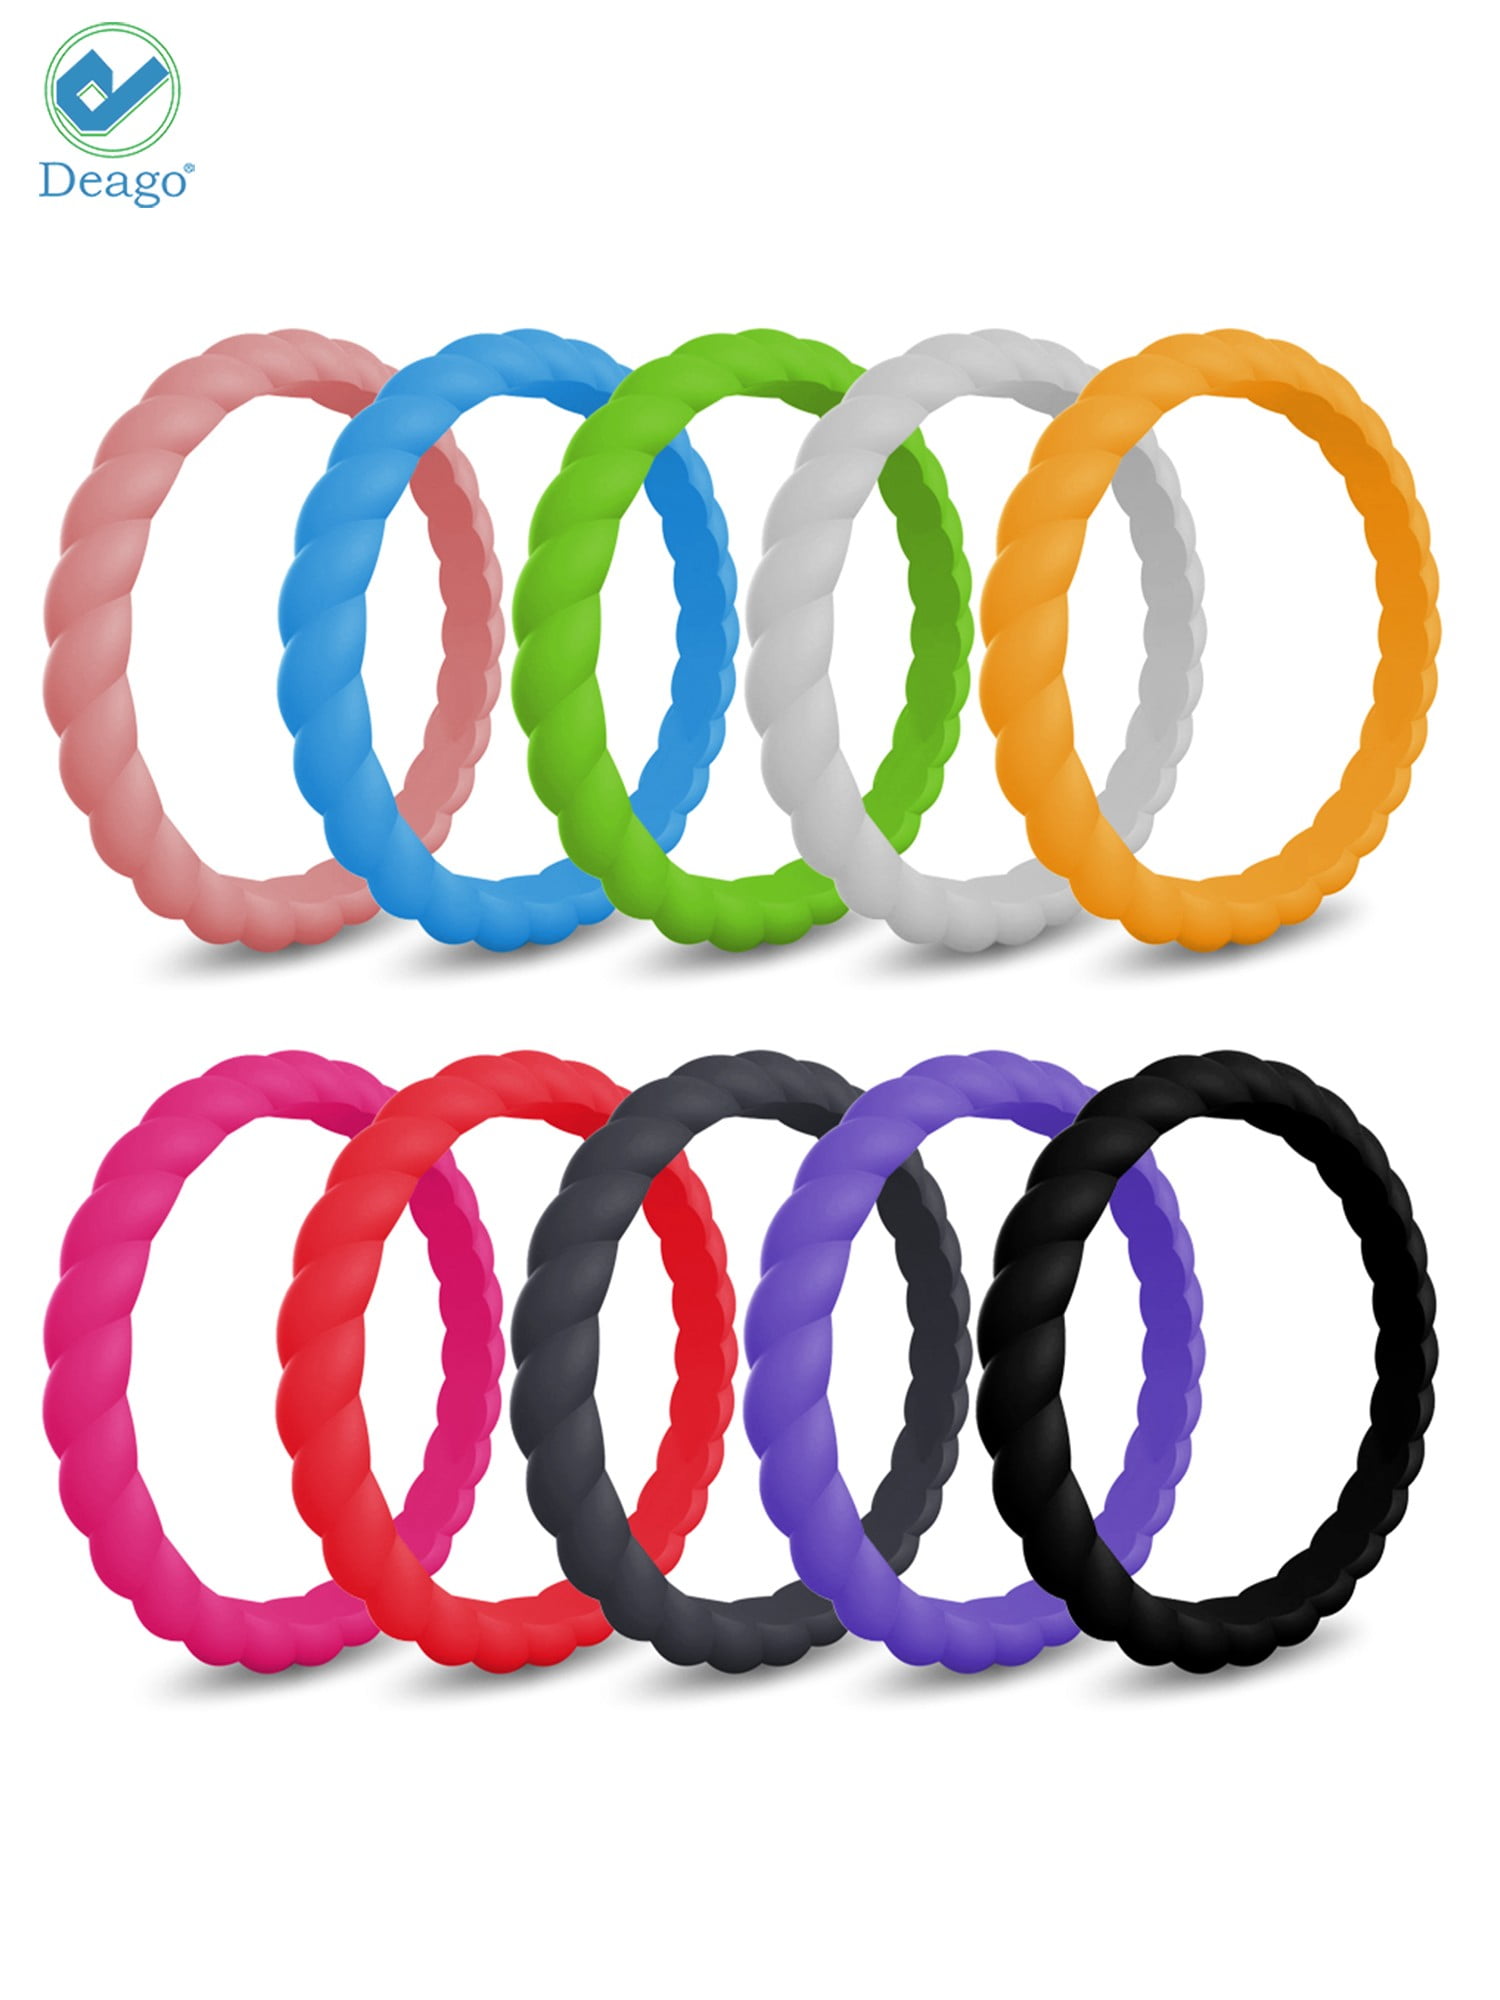 Silicone Wedding Ring for Women Braided Silicone Rings Comfortable Fit Skin Safe Silicone Rubber Wedding Bands 